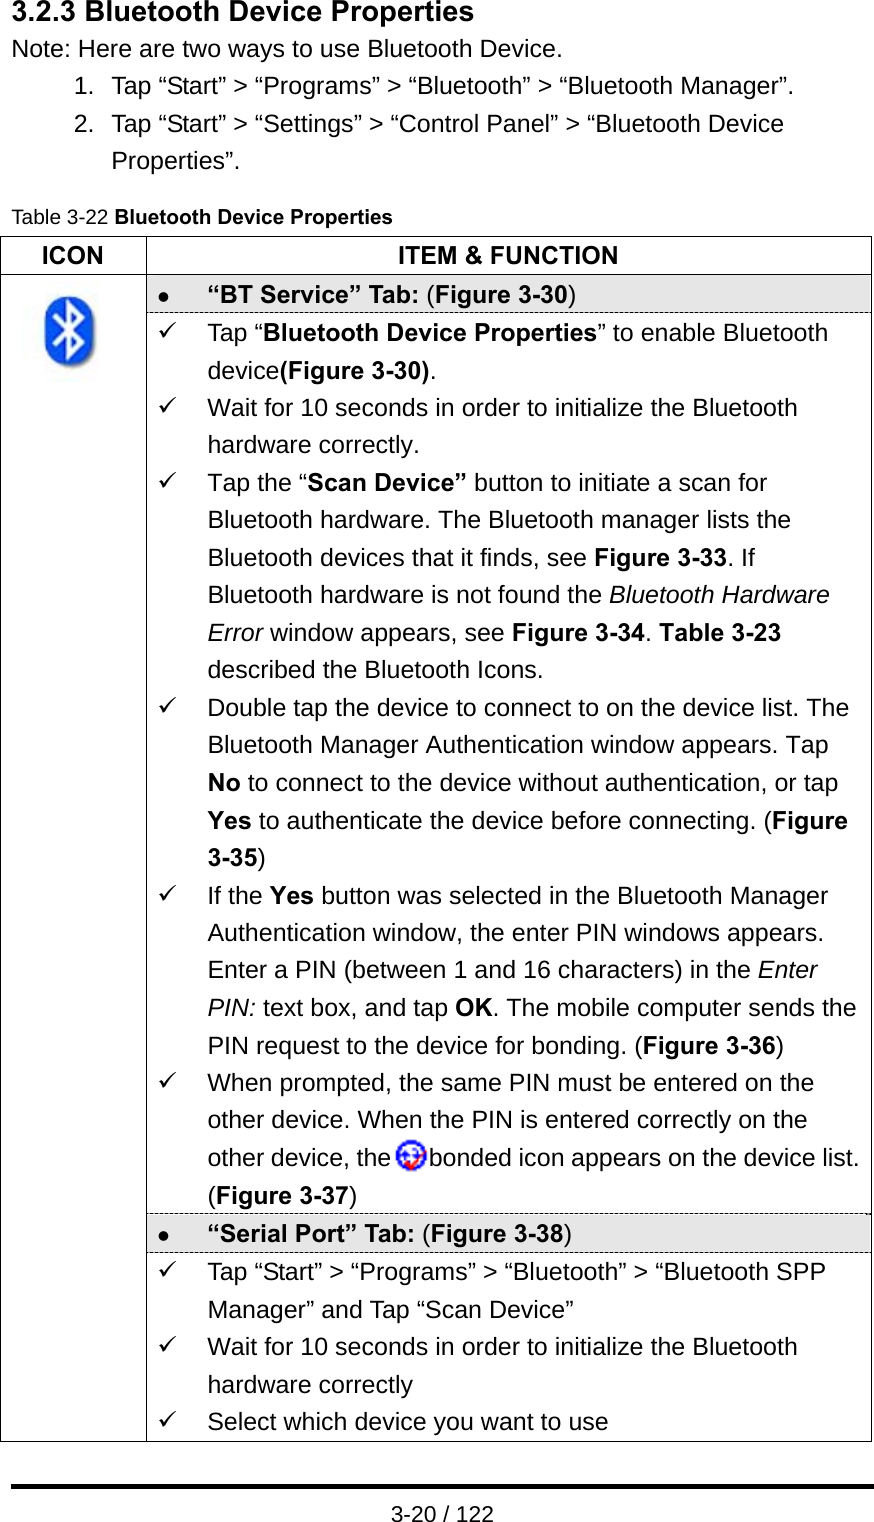  3-20 / 122 3.2.3 Bluetooth Device Properties Note: Here are two ways to use Bluetooth Device. 1.  Tap “Start” &gt; “Programs” &gt; “Bluetooth” &gt; “Bluetooth Manager”. 2.  Tap “Start” &gt; “Settings” &gt; “Control Panel” &gt; “Bluetooth Device Properties”. Table 3-22 Bluetooth Device Properties ICON  ITEM &amp; FUNCTION z “BT Service” Tab: (Figure 3-30) 9 Tap “Bluetooth Device Properties” to enable Bluetooth device(Figure 3-30). 9  Wait for 10 seconds in order to initialize the Bluetooth hardware correctly. 9  Tap the “Scan Device” button to initiate a scan for Bluetooth hardware. The Bluetooth manager lists the Bluetooth devices that it finds, see Figure 3-33. If Bluetooth hardware is not found the Bluetooth Hardware Error window appears, see Figure 3-34. Table 3-23 described the Bluetooth Icons. 9  Double tap the device to connect to on the device list. The Bluetooth Manager Authentication window appears. Tap No to connect to the device without authentication, or tap Yes to authenticate the device before connecting. (Figure 3-35) 9 If the Yes button was selected in the Bluetooth Manager Authentication window, the enter PIN windows appears. Enter a PIN (between 1 and 16 characters) in the Enter PIN: text box, and tap OK. The mobile computer sends the PIN request to the device for bonding. (Figure 3-36) 9  When prompted, the same PIN must be entered on the other device. When the PIN is entered correctly on the other device, the   bonded icon appears on the device list. (Figure 3-37) z “Serial Port” Tab: (Figure 3-38)  9  Tap “Start” &gt; “Programs” &gt; “Bluetooth” &gt; “Bluetooth SPP Manager” and Tap “Scan Device” 9  Wait for 10 seconds in order to initialize the Bluetooth hardware correctly 9  Select which device you want to use 